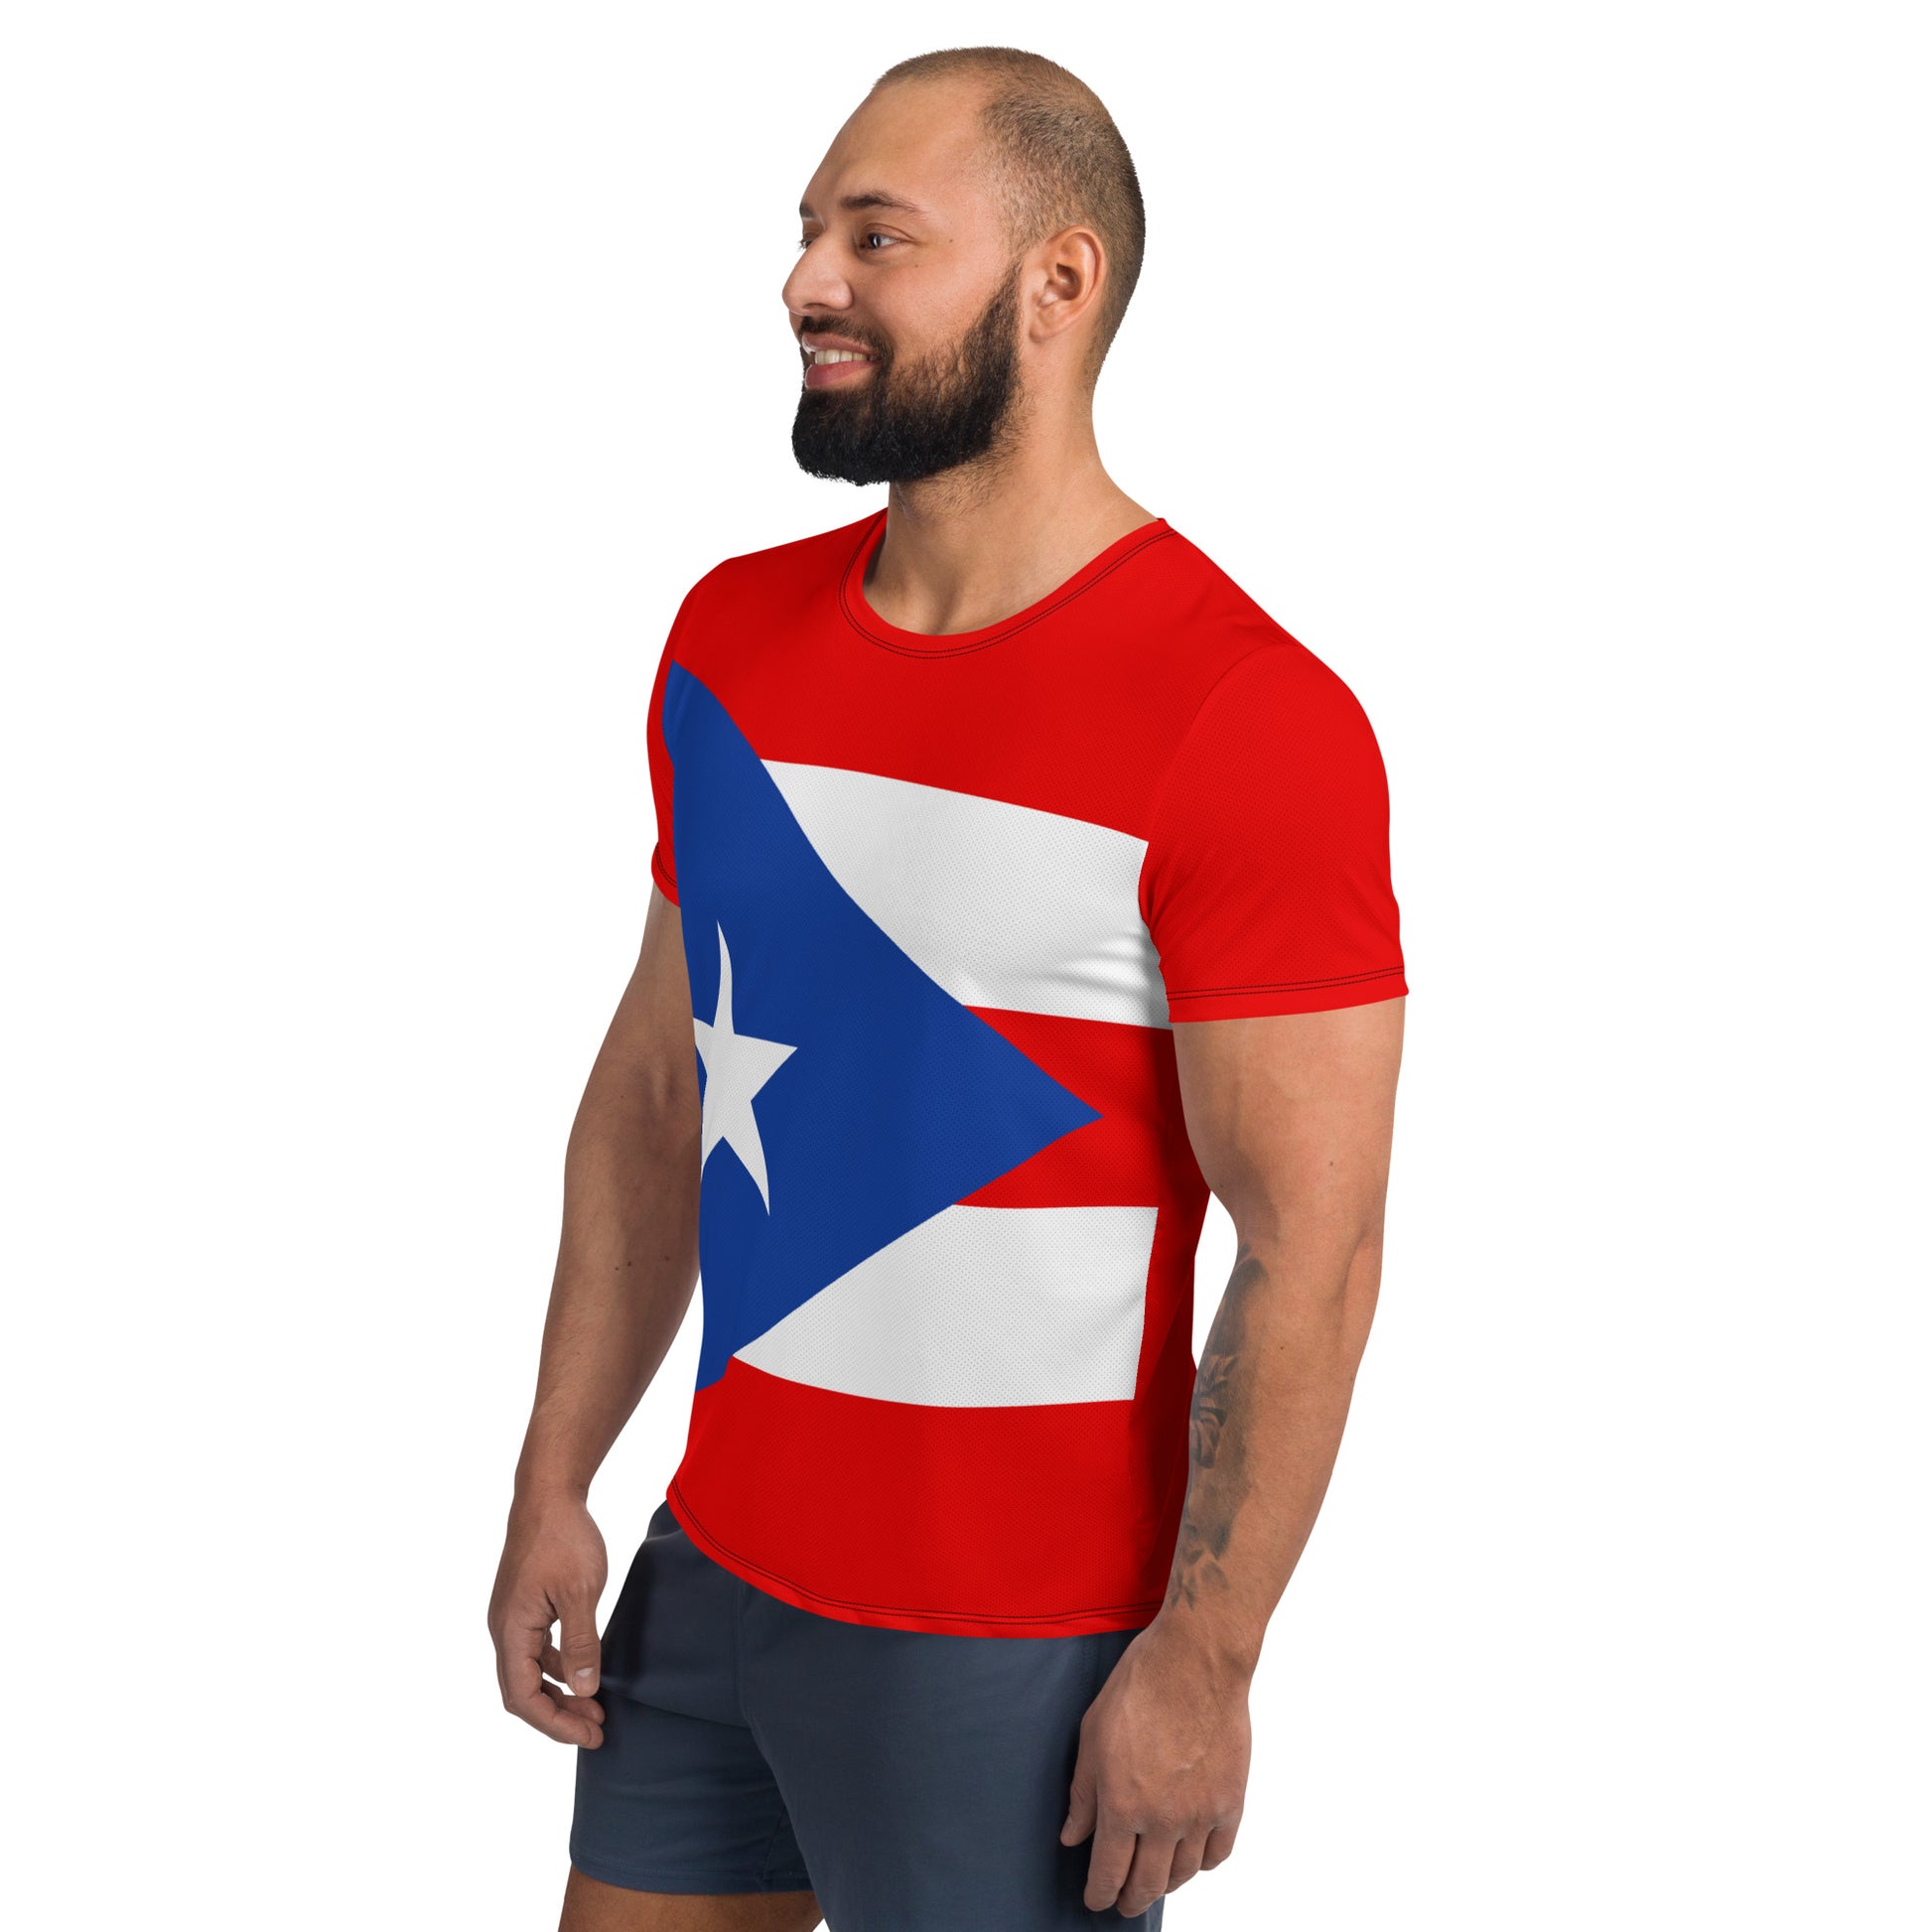 Show Your Puerto Rican Patriotism with this Flag Men's Tee